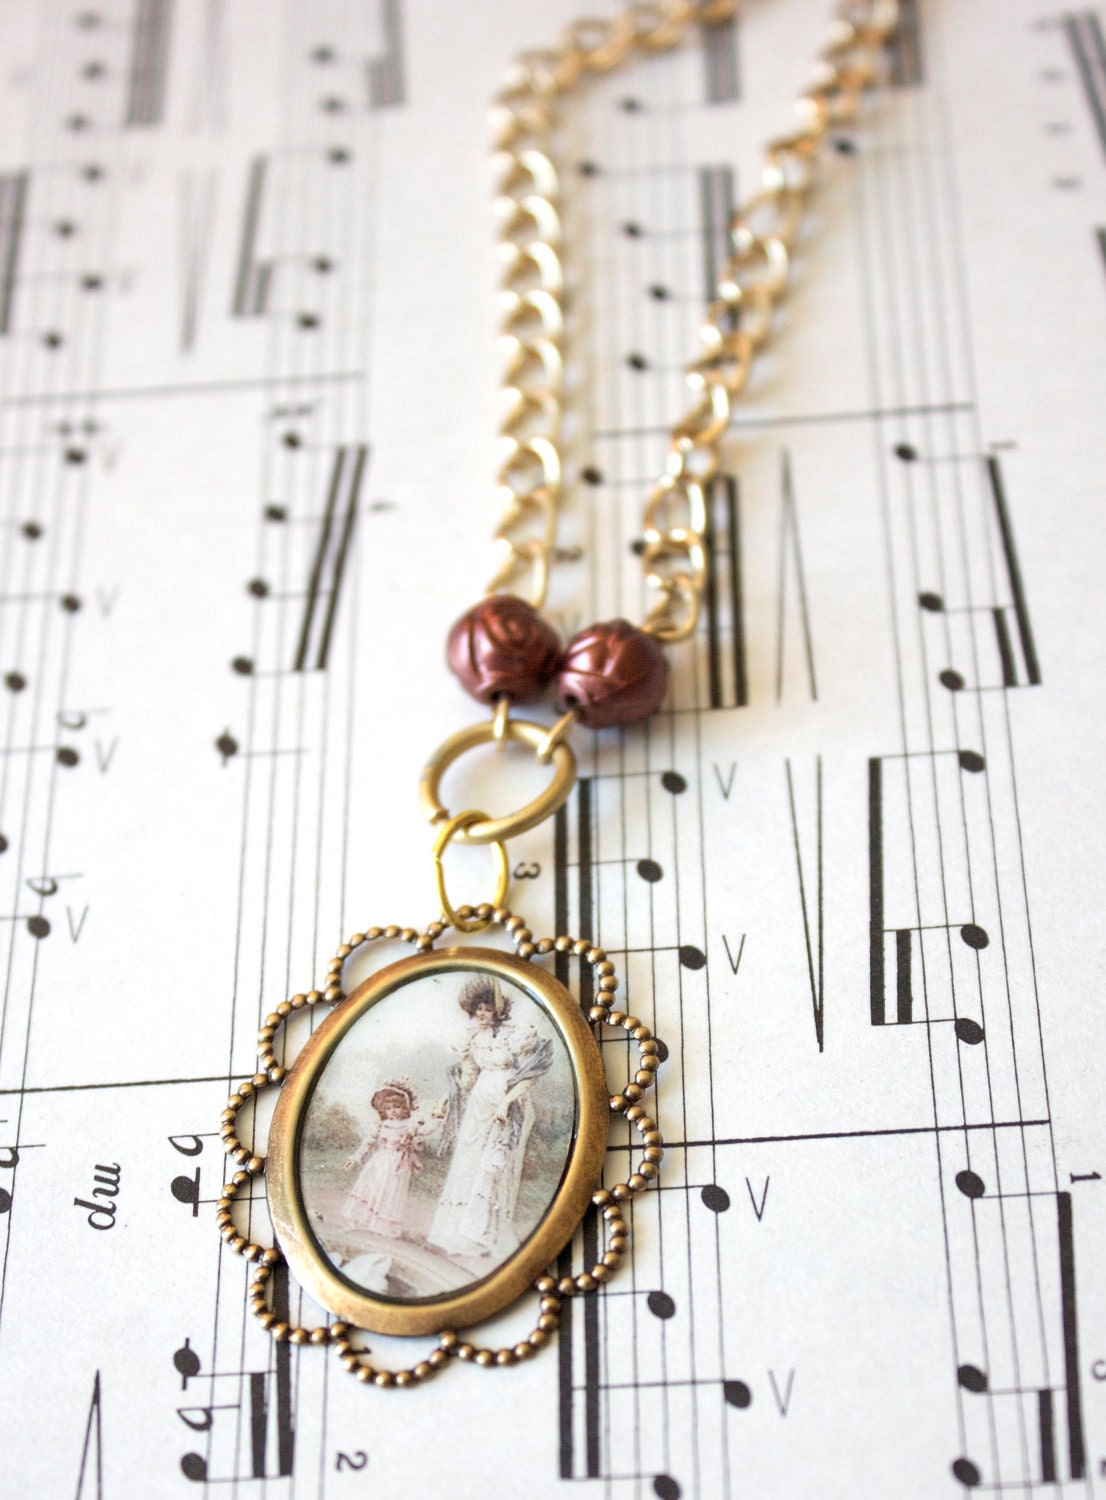 Victorian pendant necklace - romantic - red rose beads - gold chain